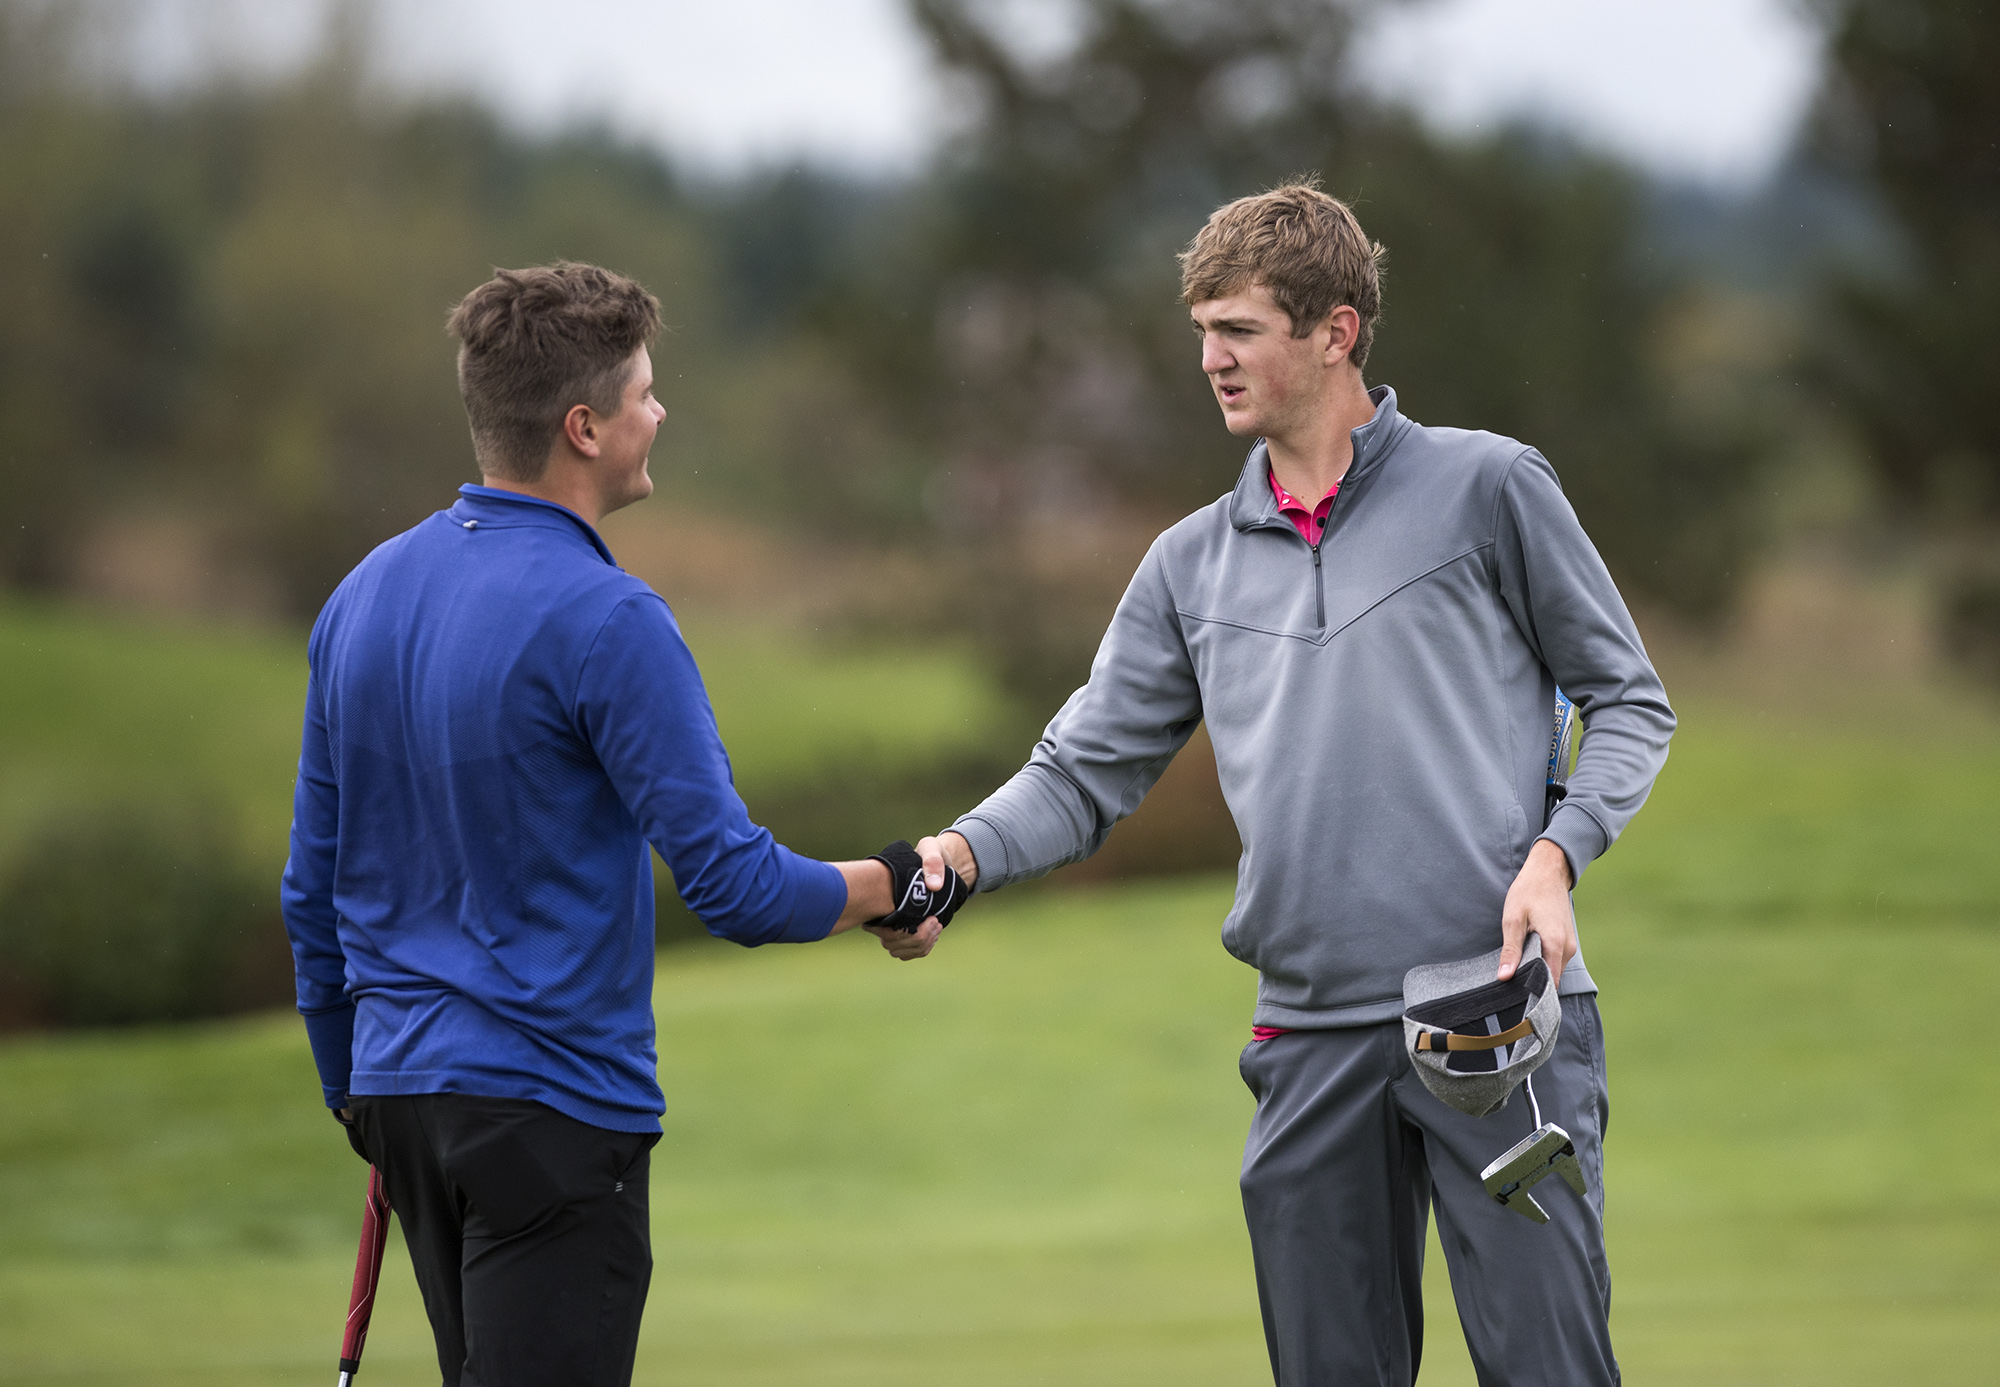 Mountain View's Mason White, left, and Prairie's Dante Heitschmidt shake hands after the 3A district golf tournament at Tri-Mountain in Ridgefield Tuesday afternoon, Oct. 10, 2017.